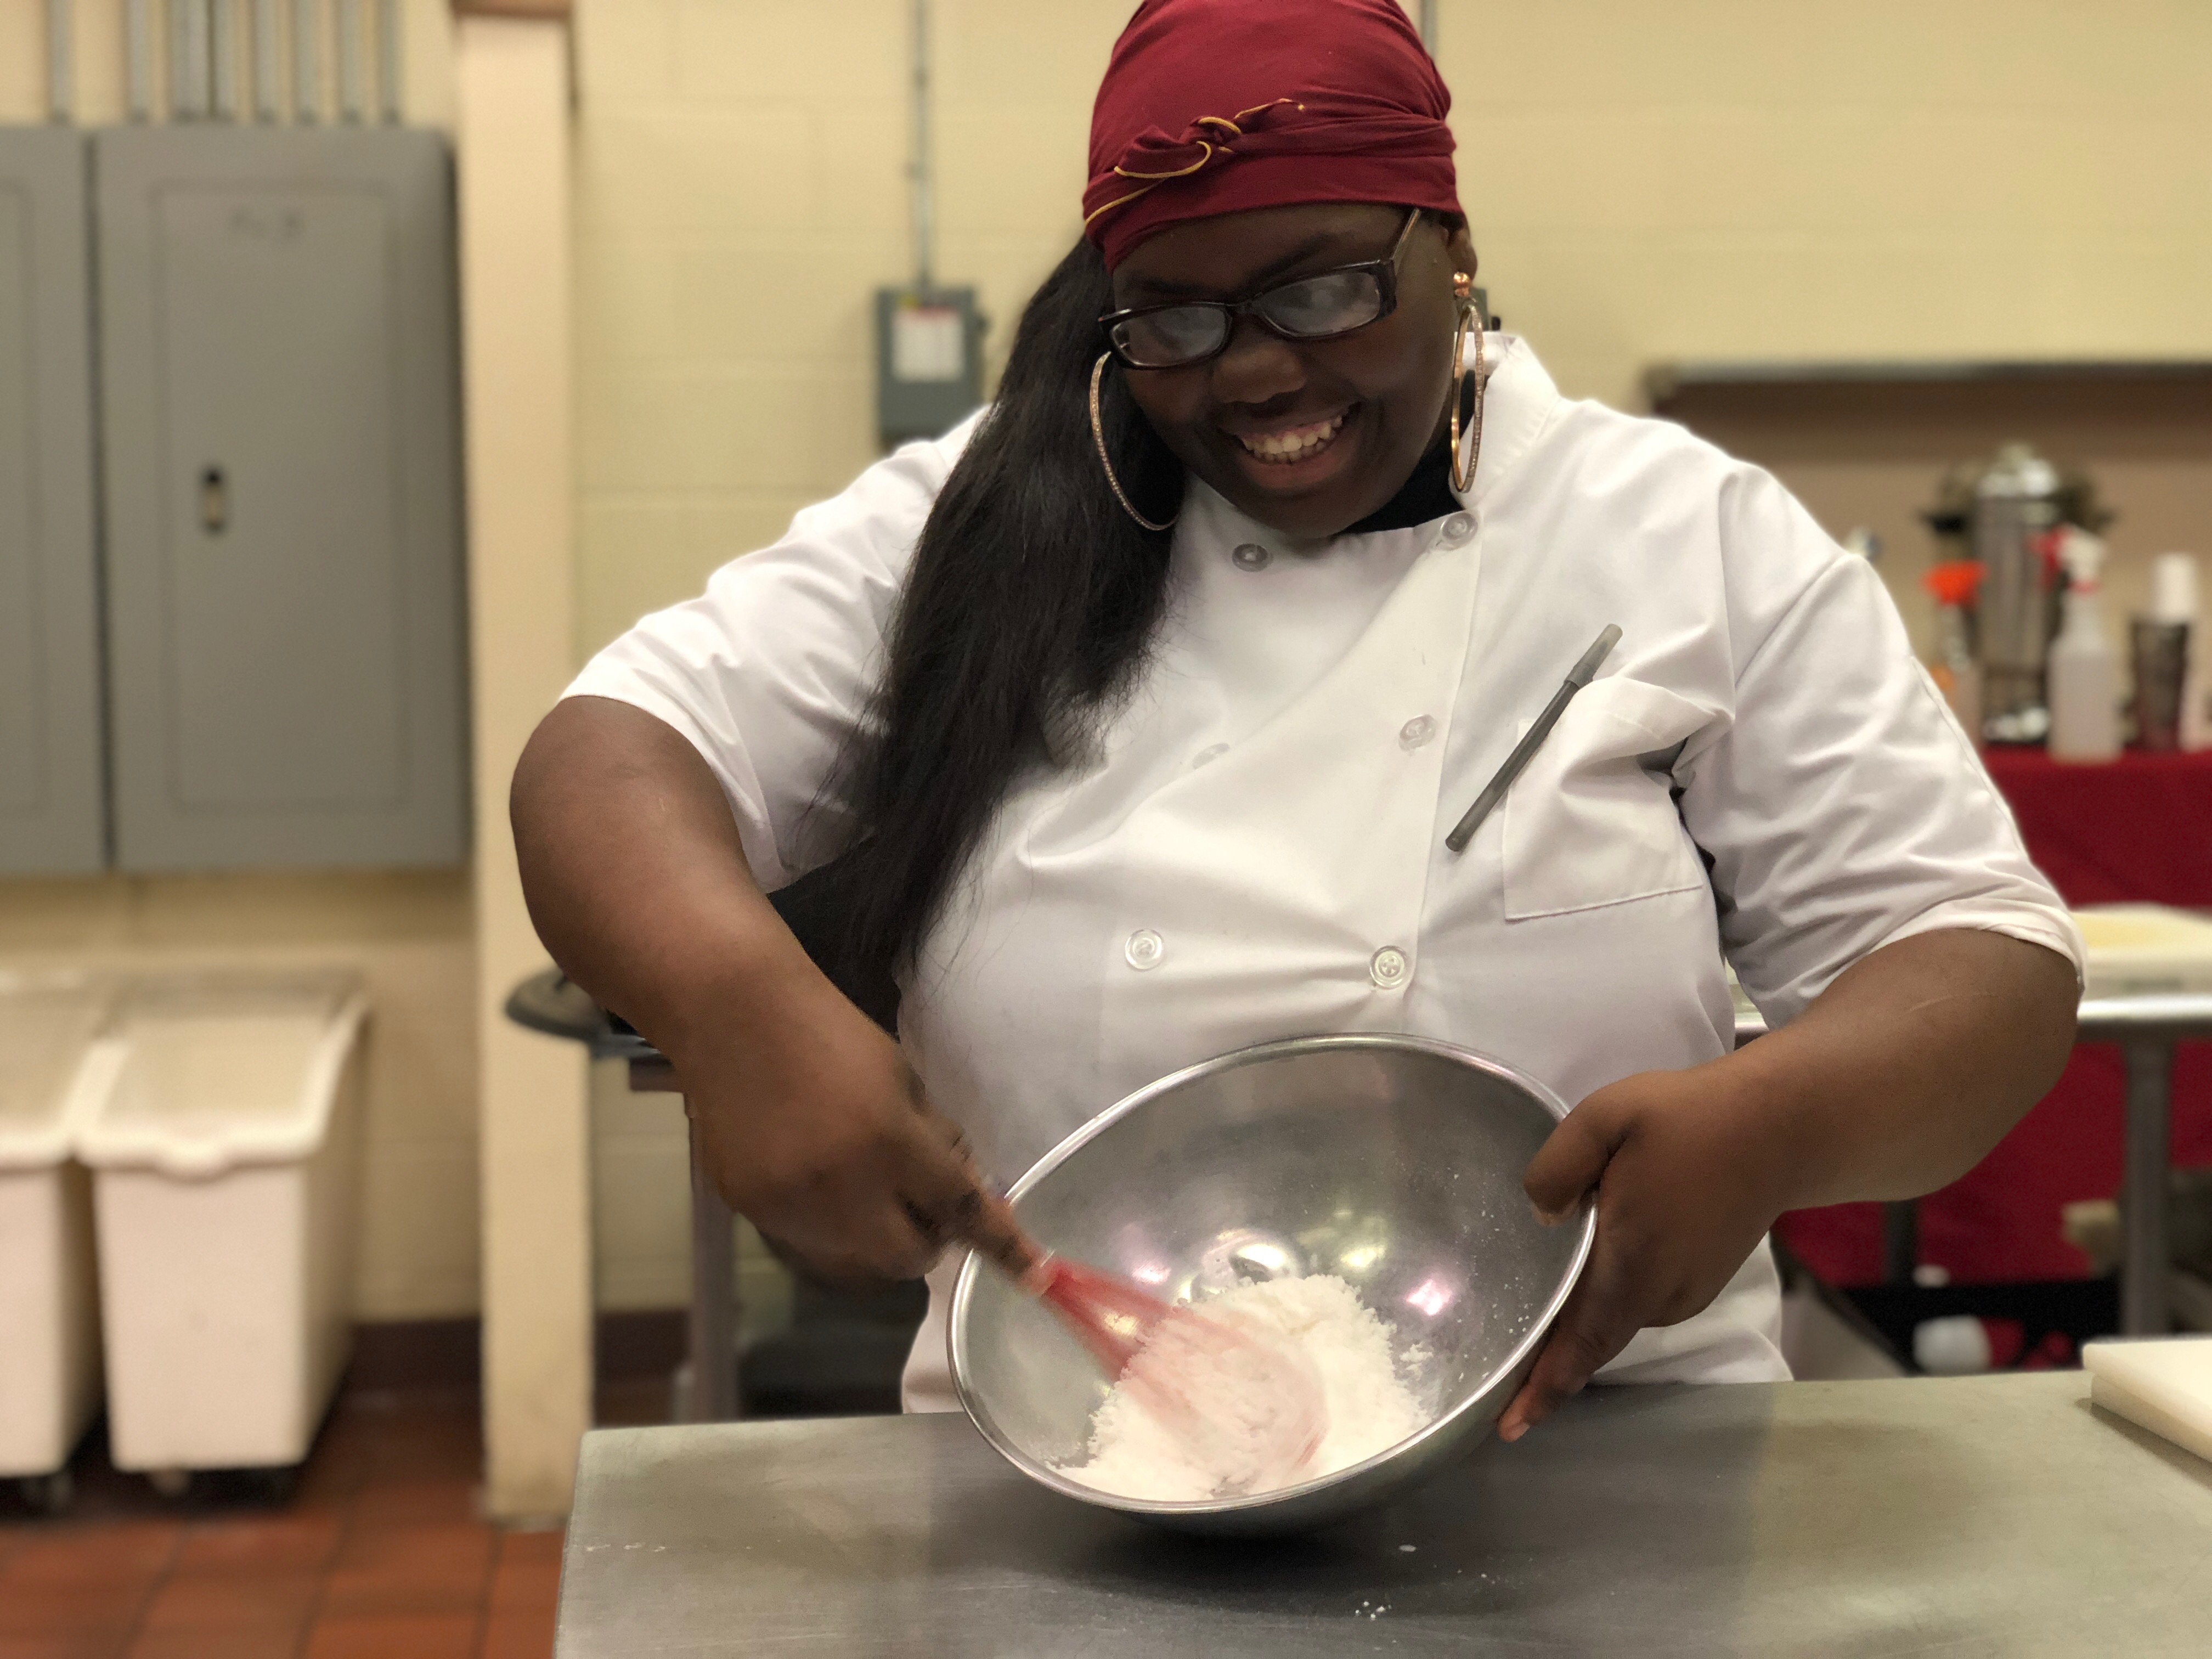 Students learn key culinary skills that will prepare them for success in the food industry. 